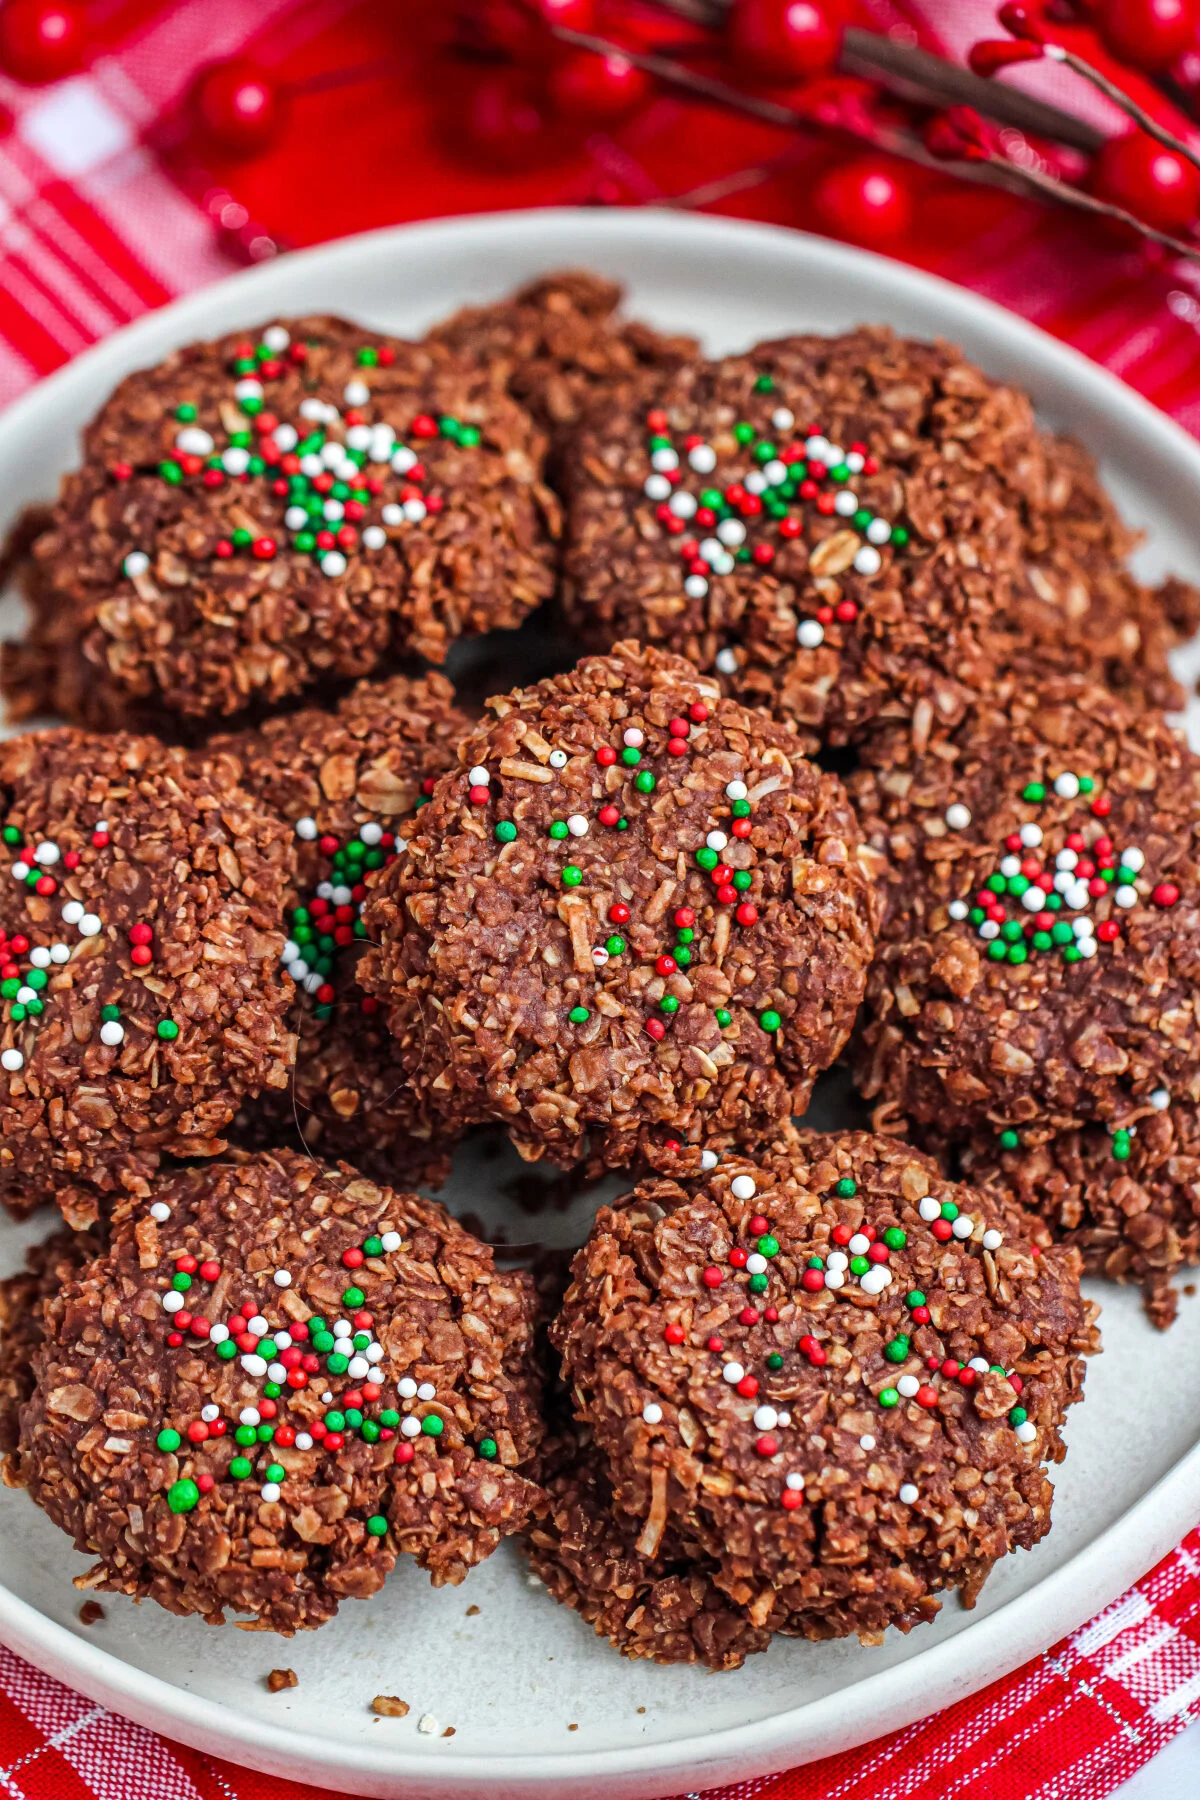 A recipe for no bake chocolate haystack cookies that is super simple to make and a great treat for Christmas or winter parties.